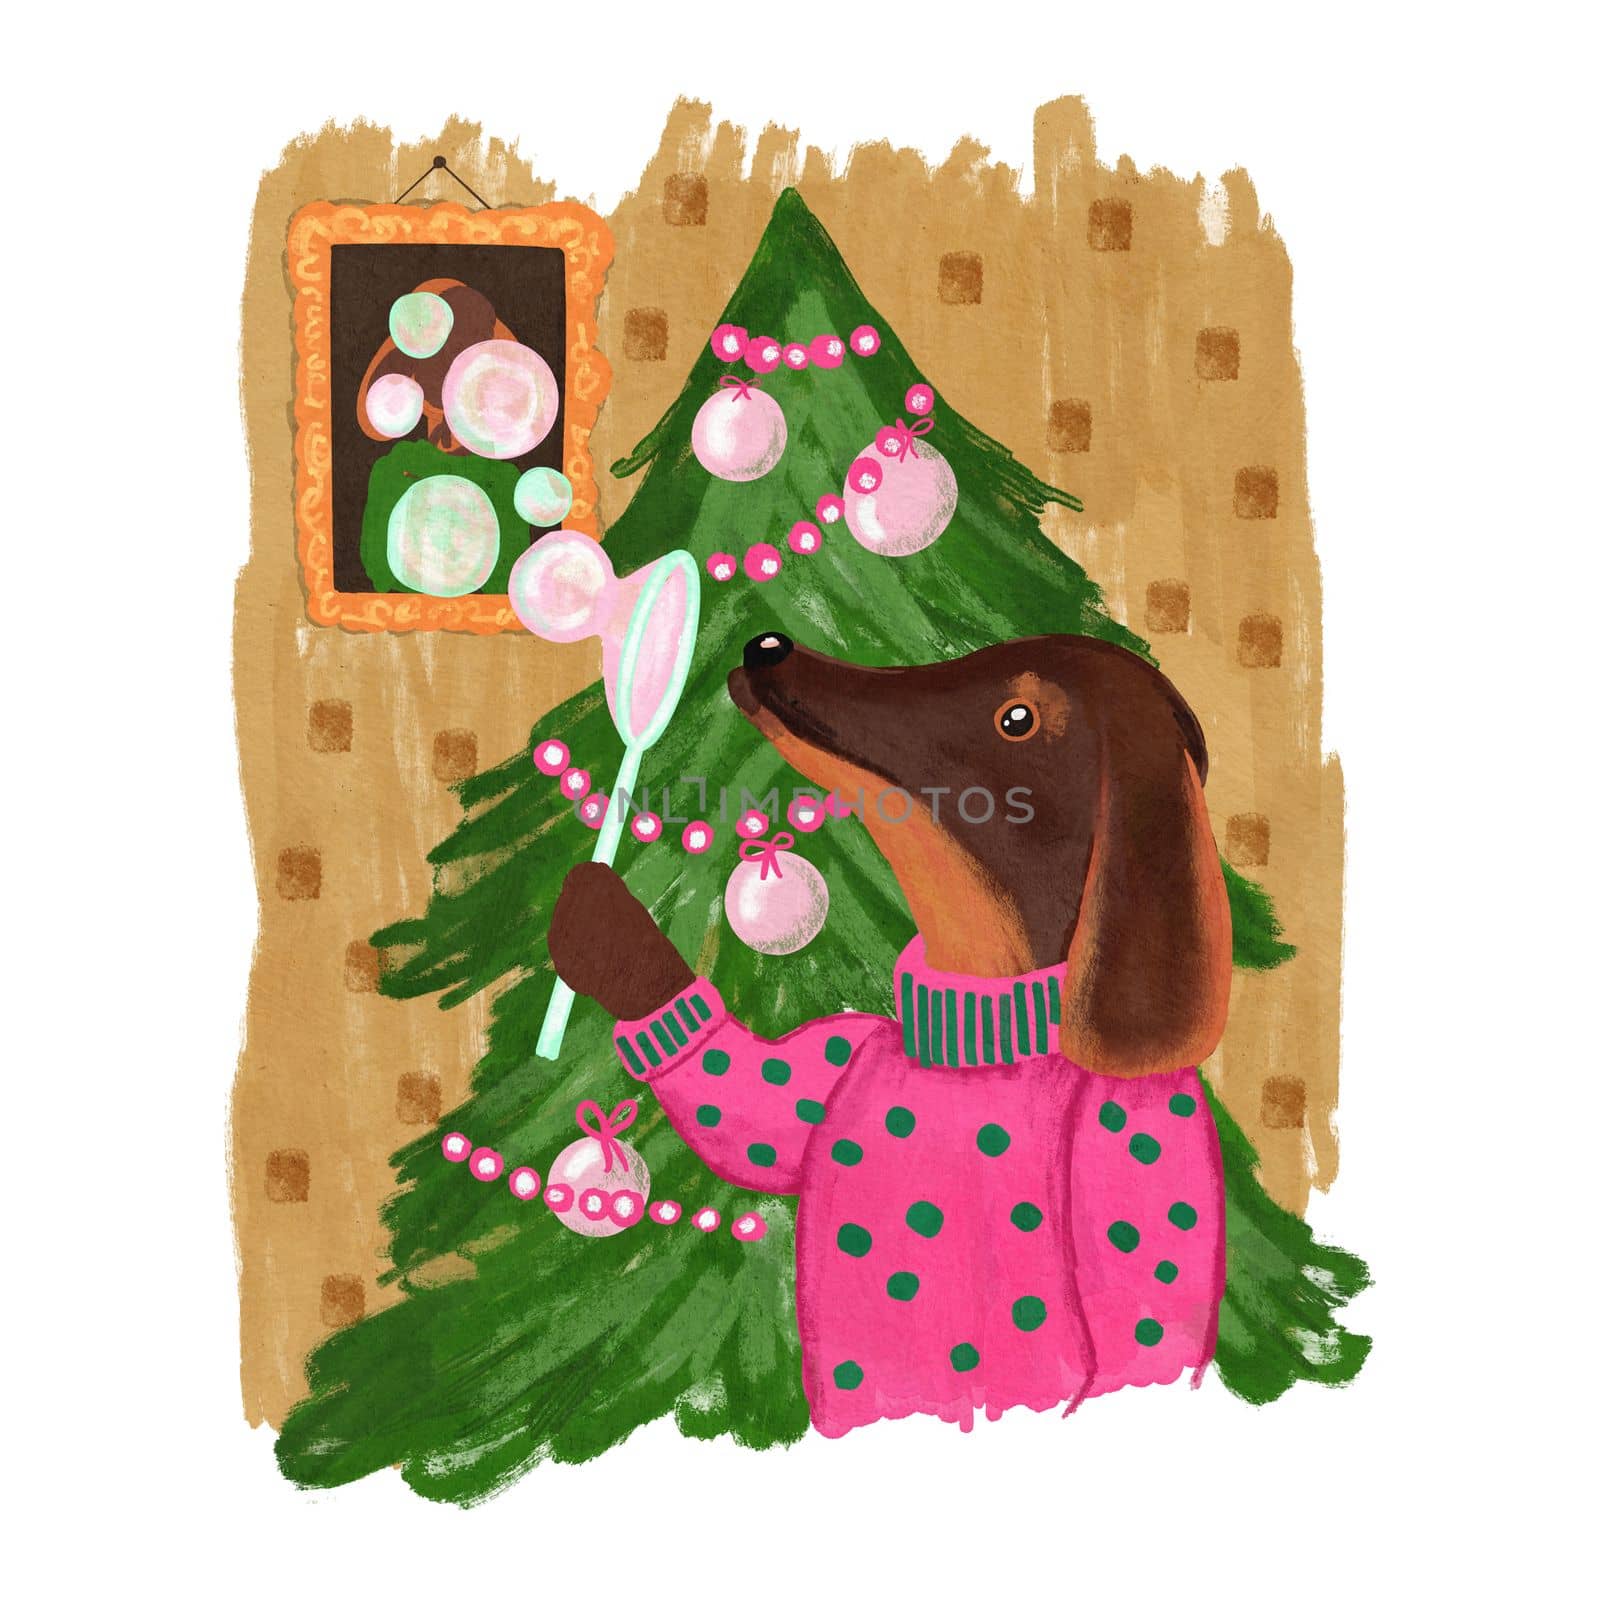 Hand drawn illustration of dog dachshund in pink sweater near christmas tree in home room interior. Cute character winter design for poster invitation card, funny print for children kids merry december decorative art. by Lagmar